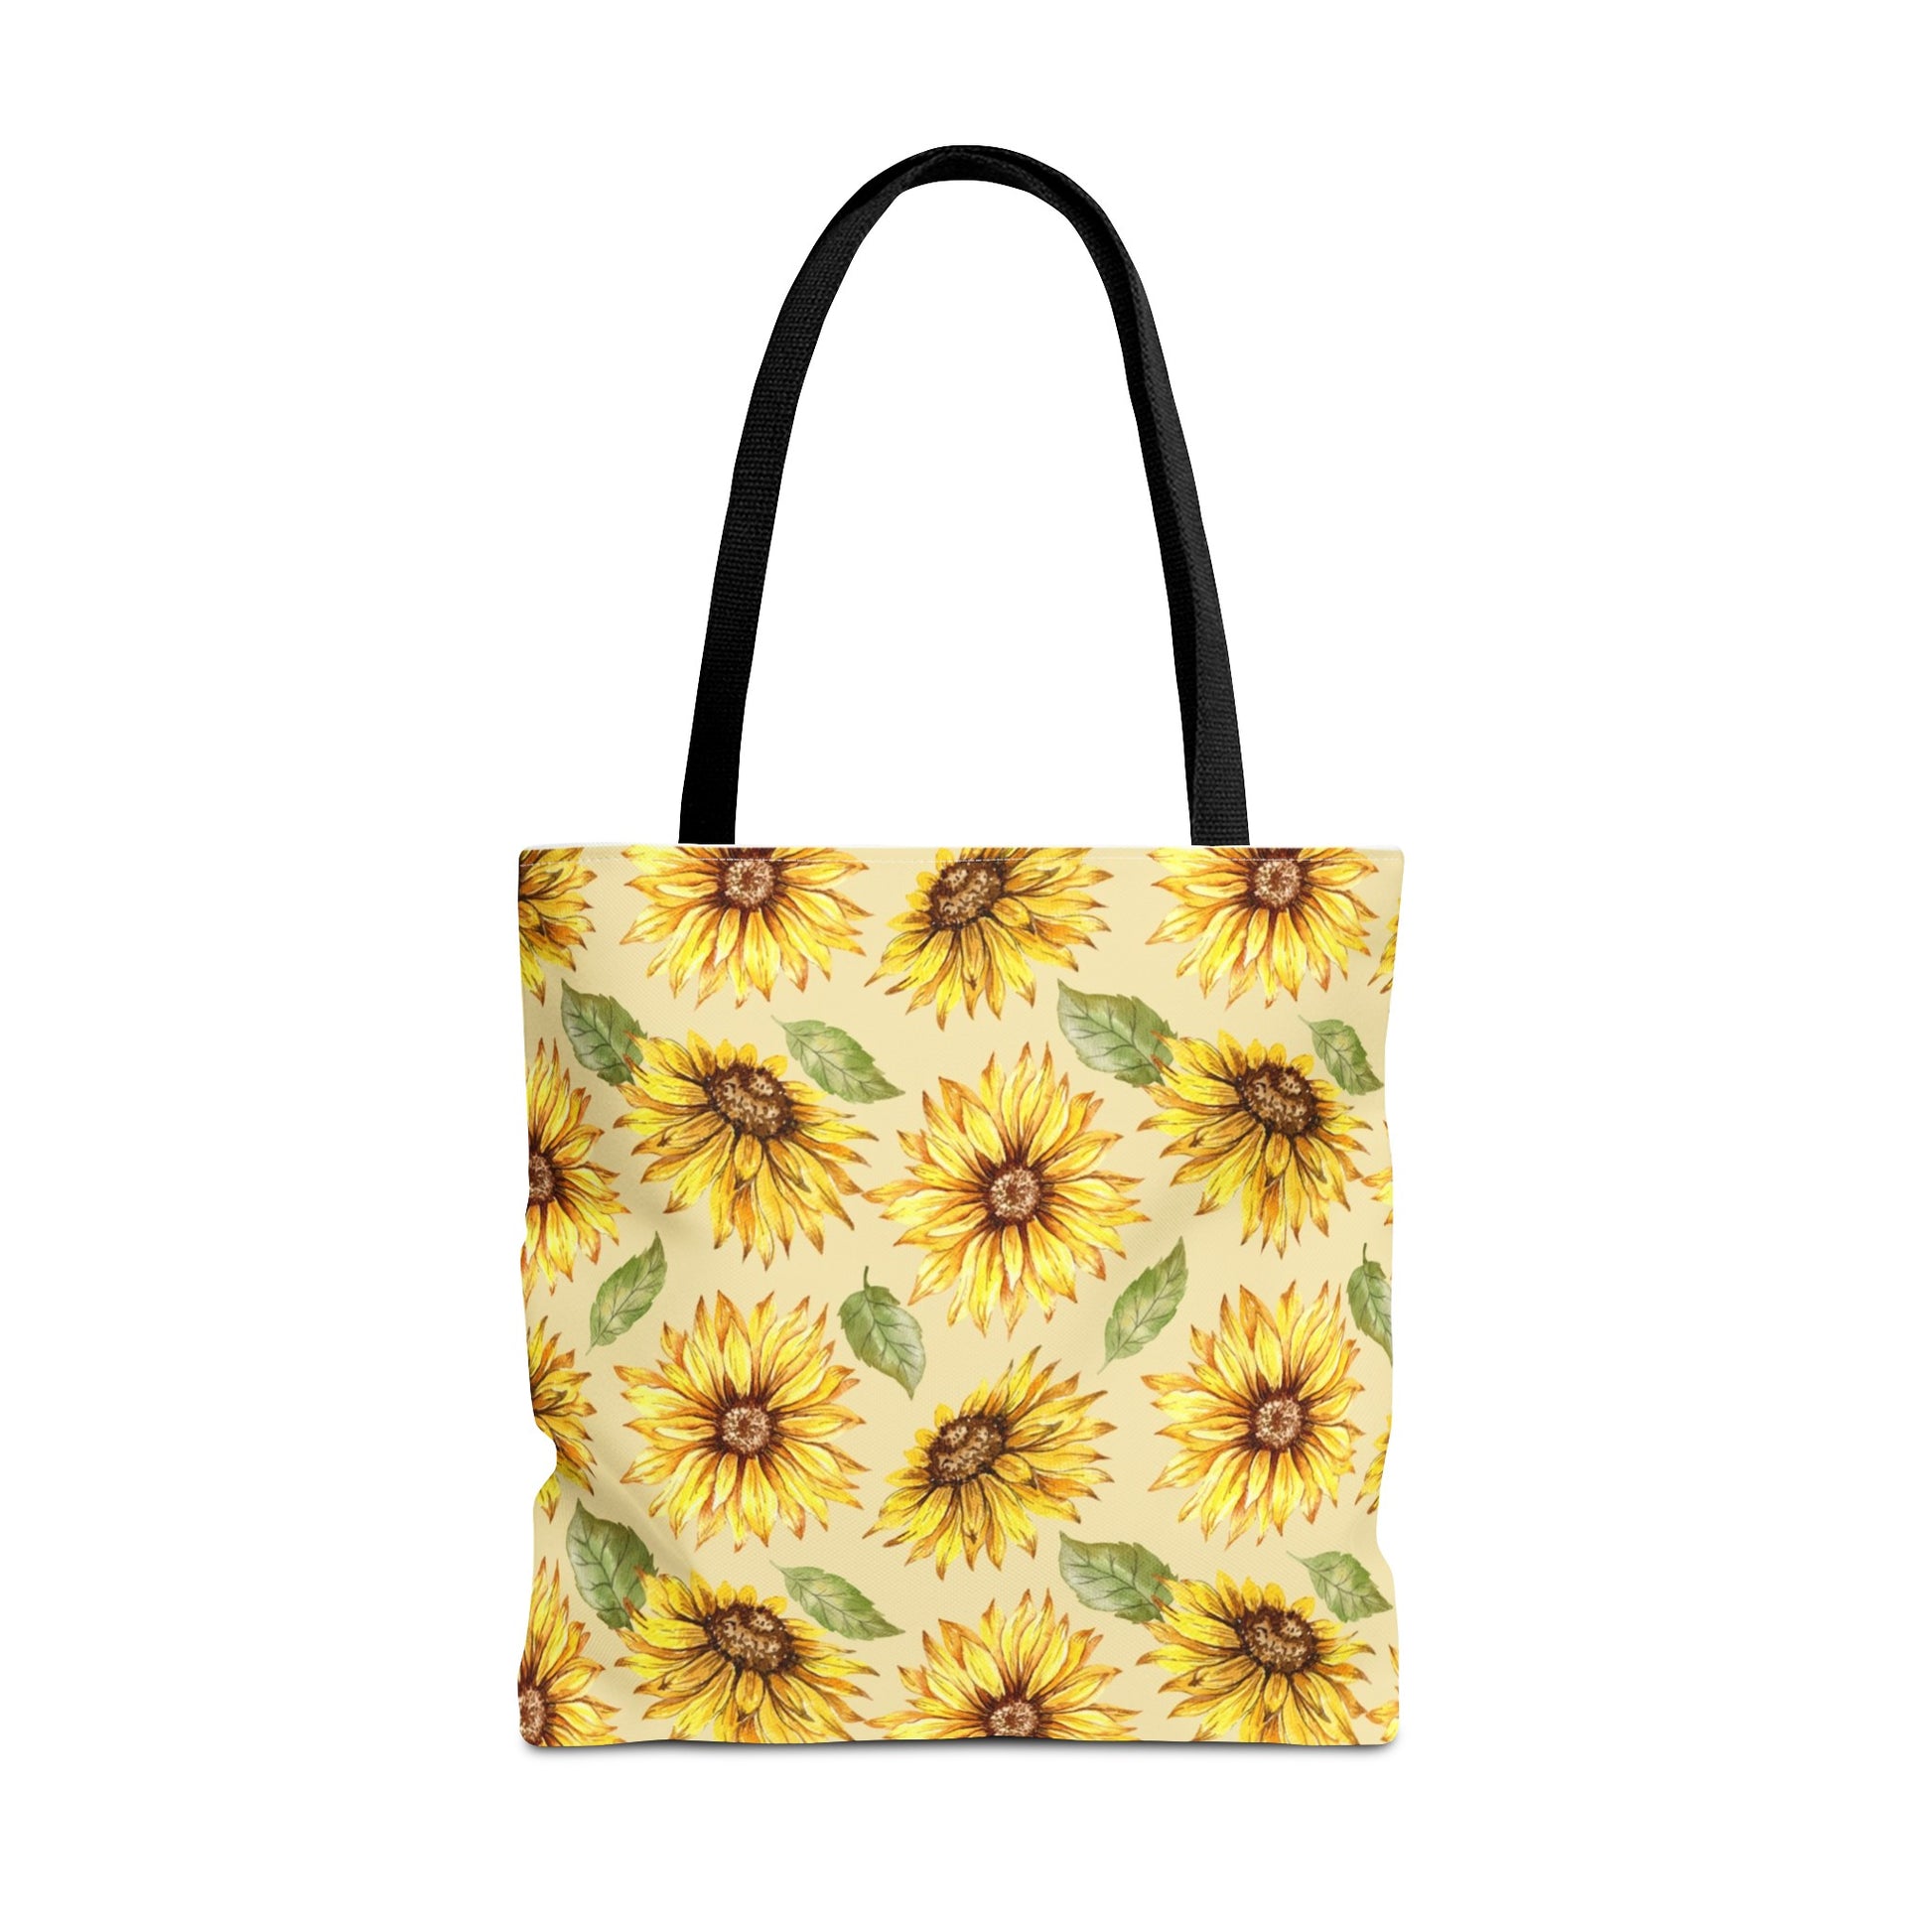 Printify's Yellow Floral Tote Bag with black handles features three sizes and is made of polyester with sunflowers.